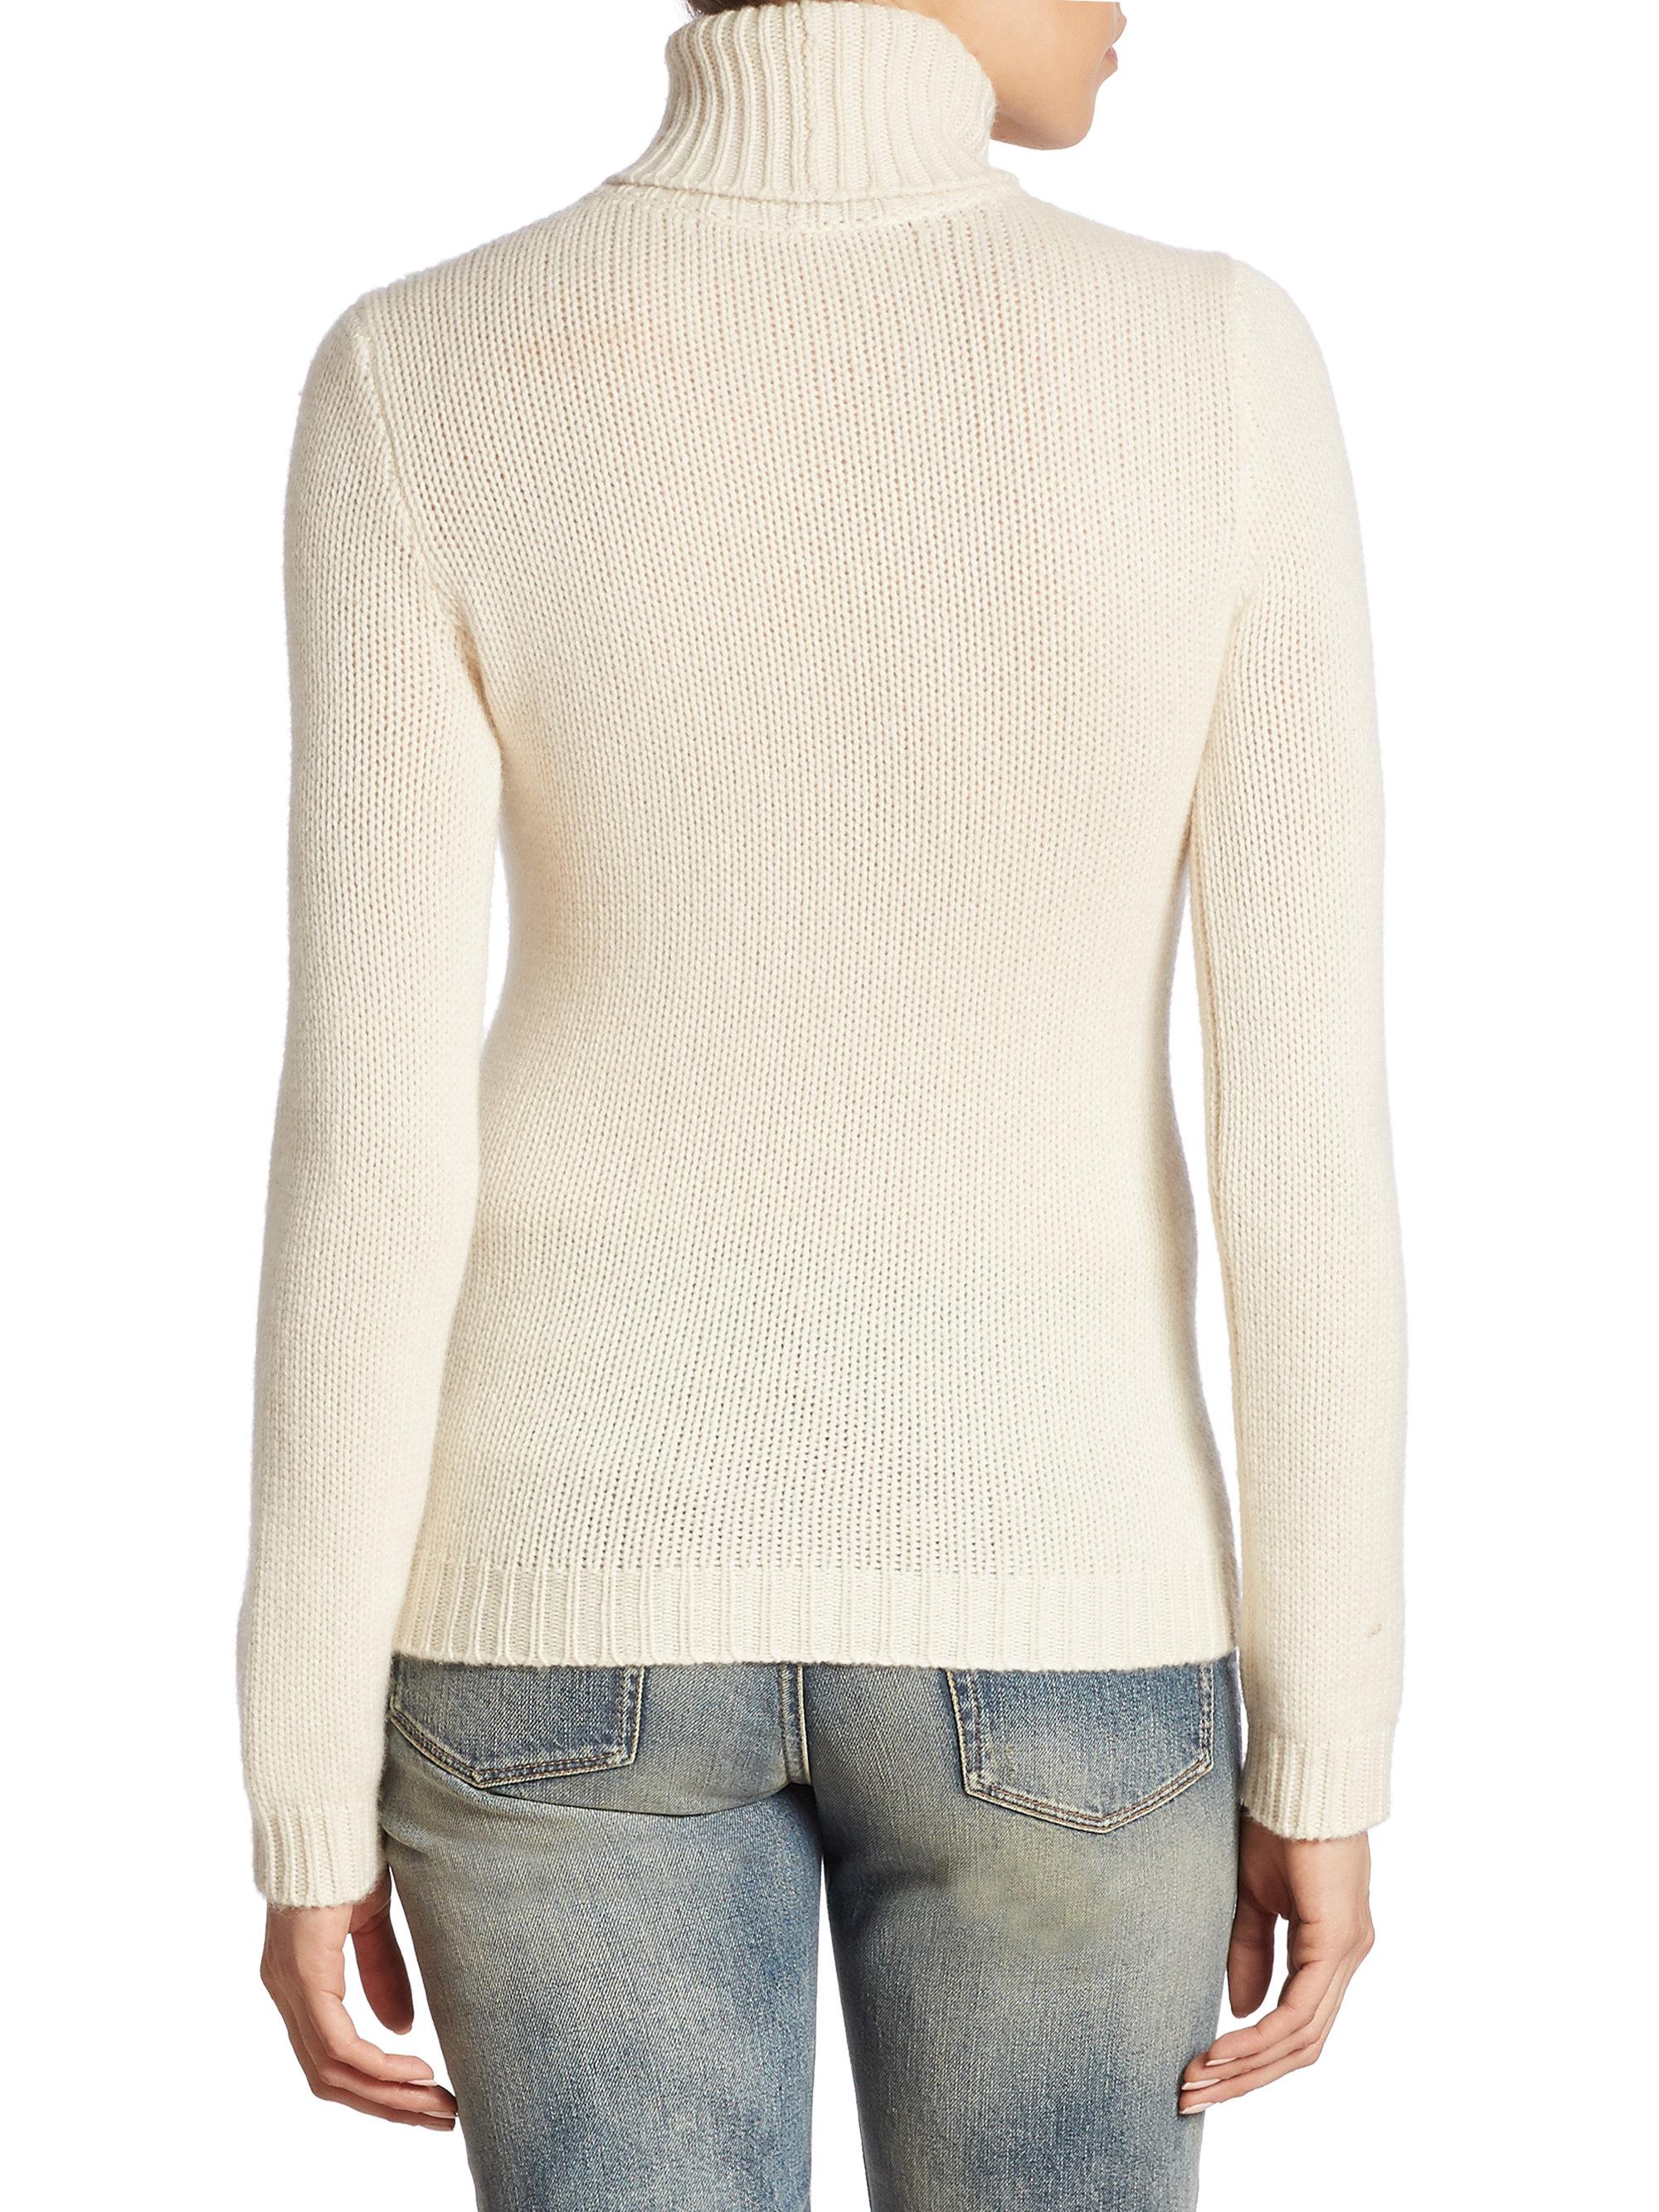 Lyst - Ralph Lauren Collection Iconic Flag Cashmere Turtleneck Sweater ...